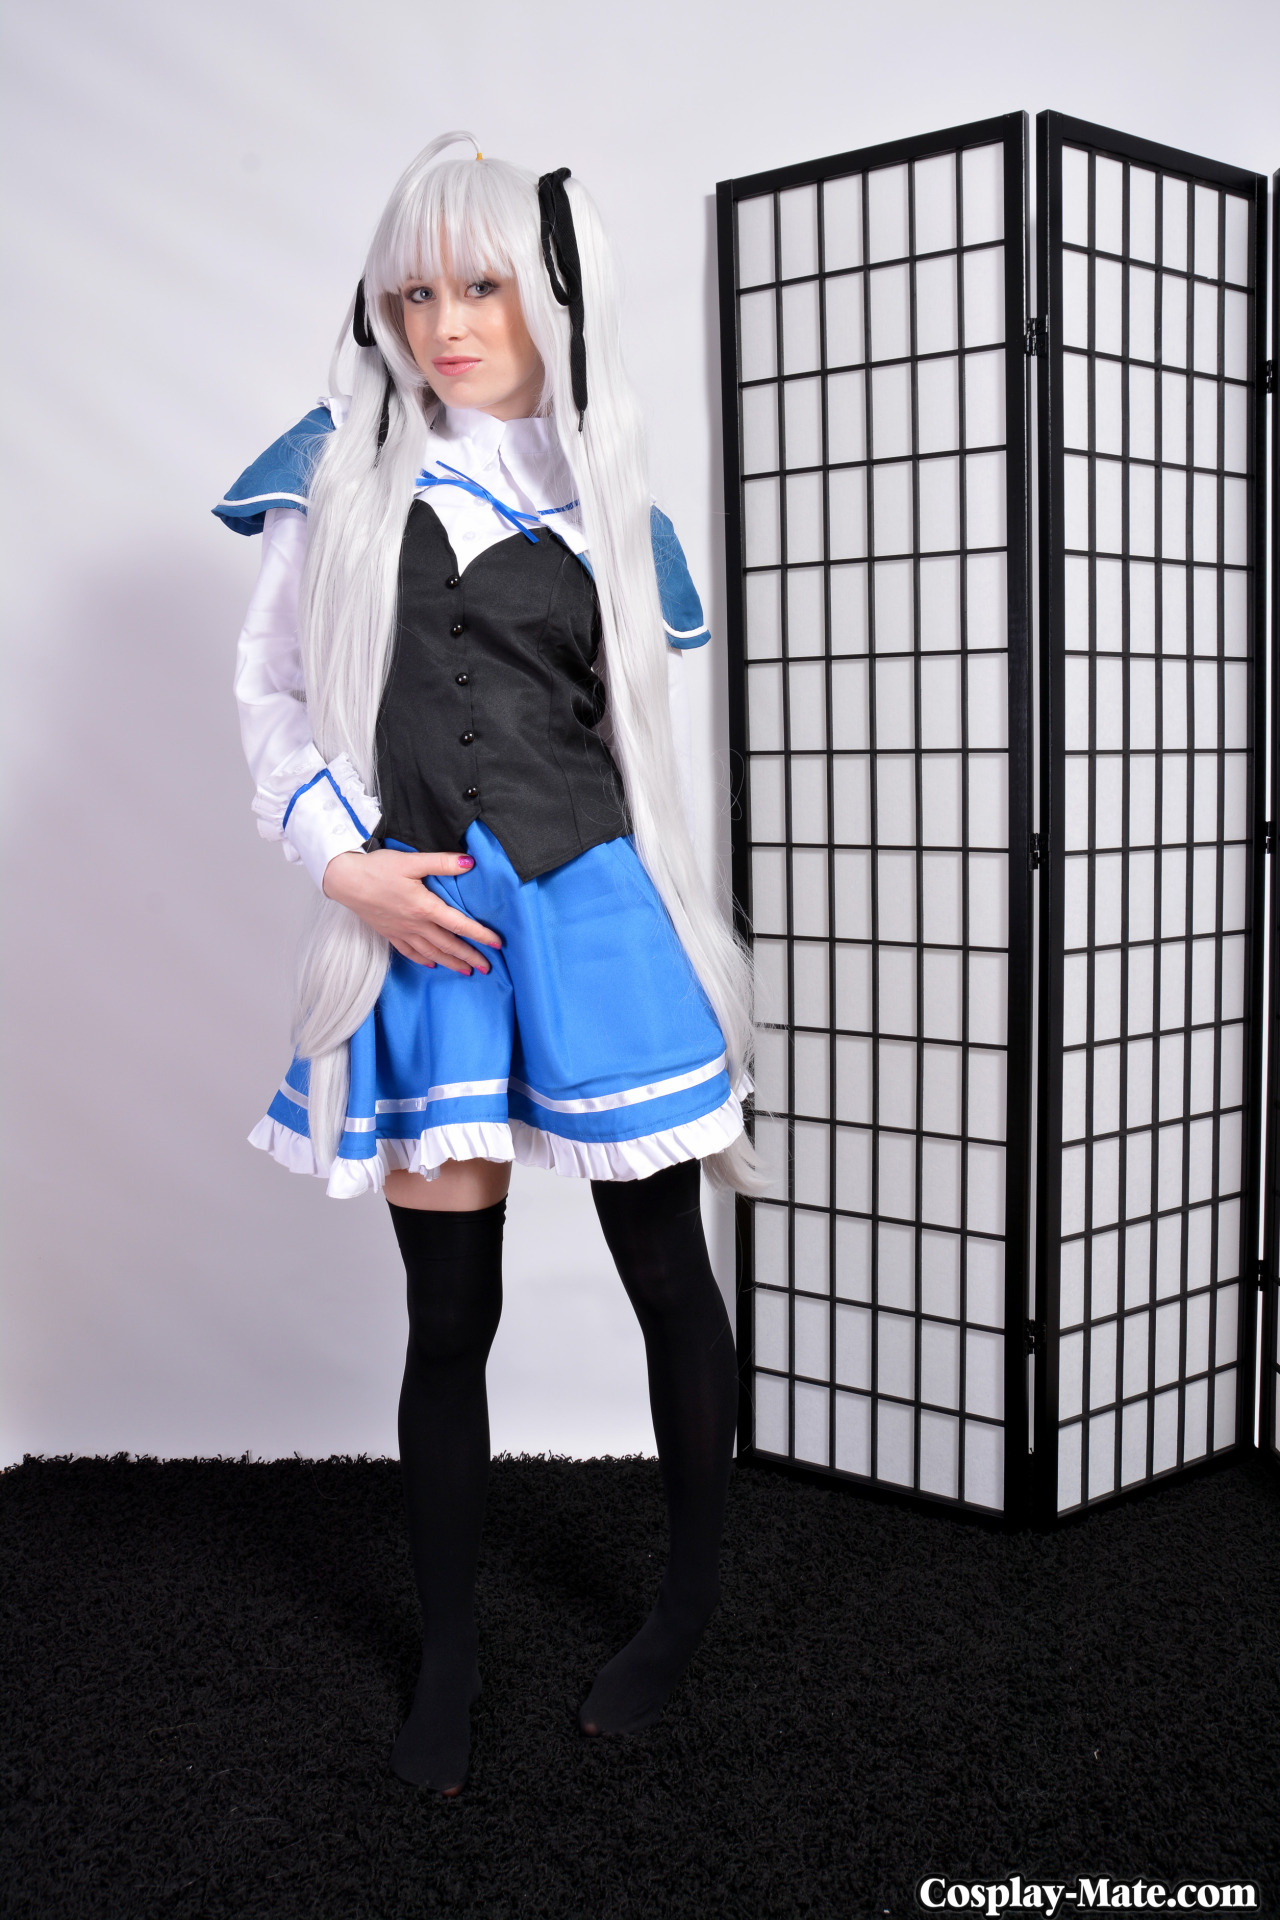 New update ready at cosplay-mate.comKira as Julie from Absolute duo in a 104 pictures